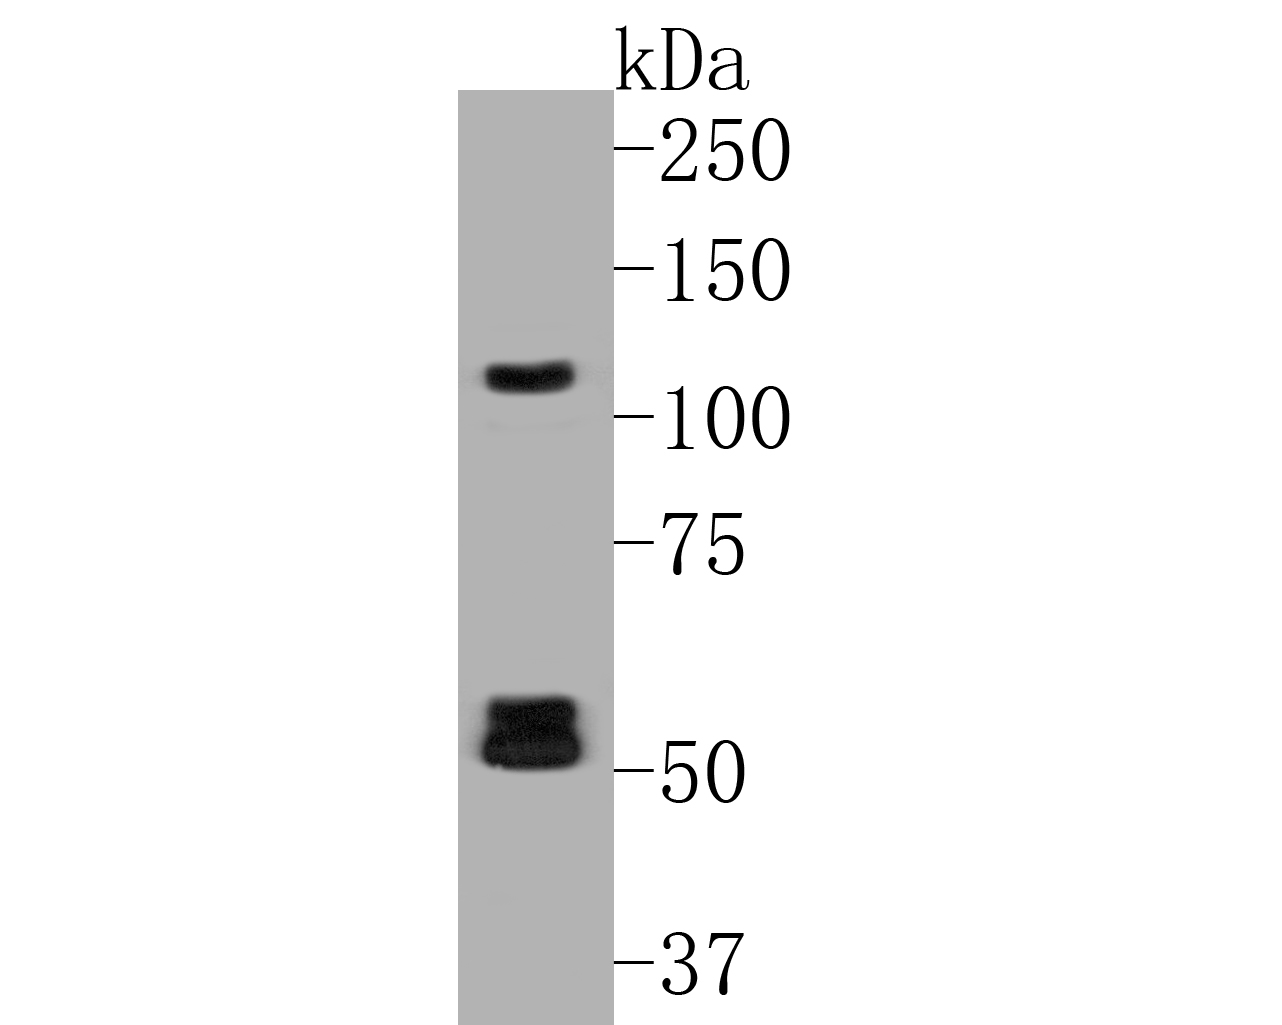 Western blot analysis of Flt3 on rat testis lysates. Proteins were transferred to a PVDF membrane and blocked with 5% BSA in PBS for 1 hour at room temperature. The primary antibody (ER2001-25, 1/500) was used in 5% BSA at room temperature for 2 hours. Goat Anti-Rabbit IgG - HRP Secondary Antibody (HA1001) at 1:5,000 dilution was used for 1 hour at room temperature.